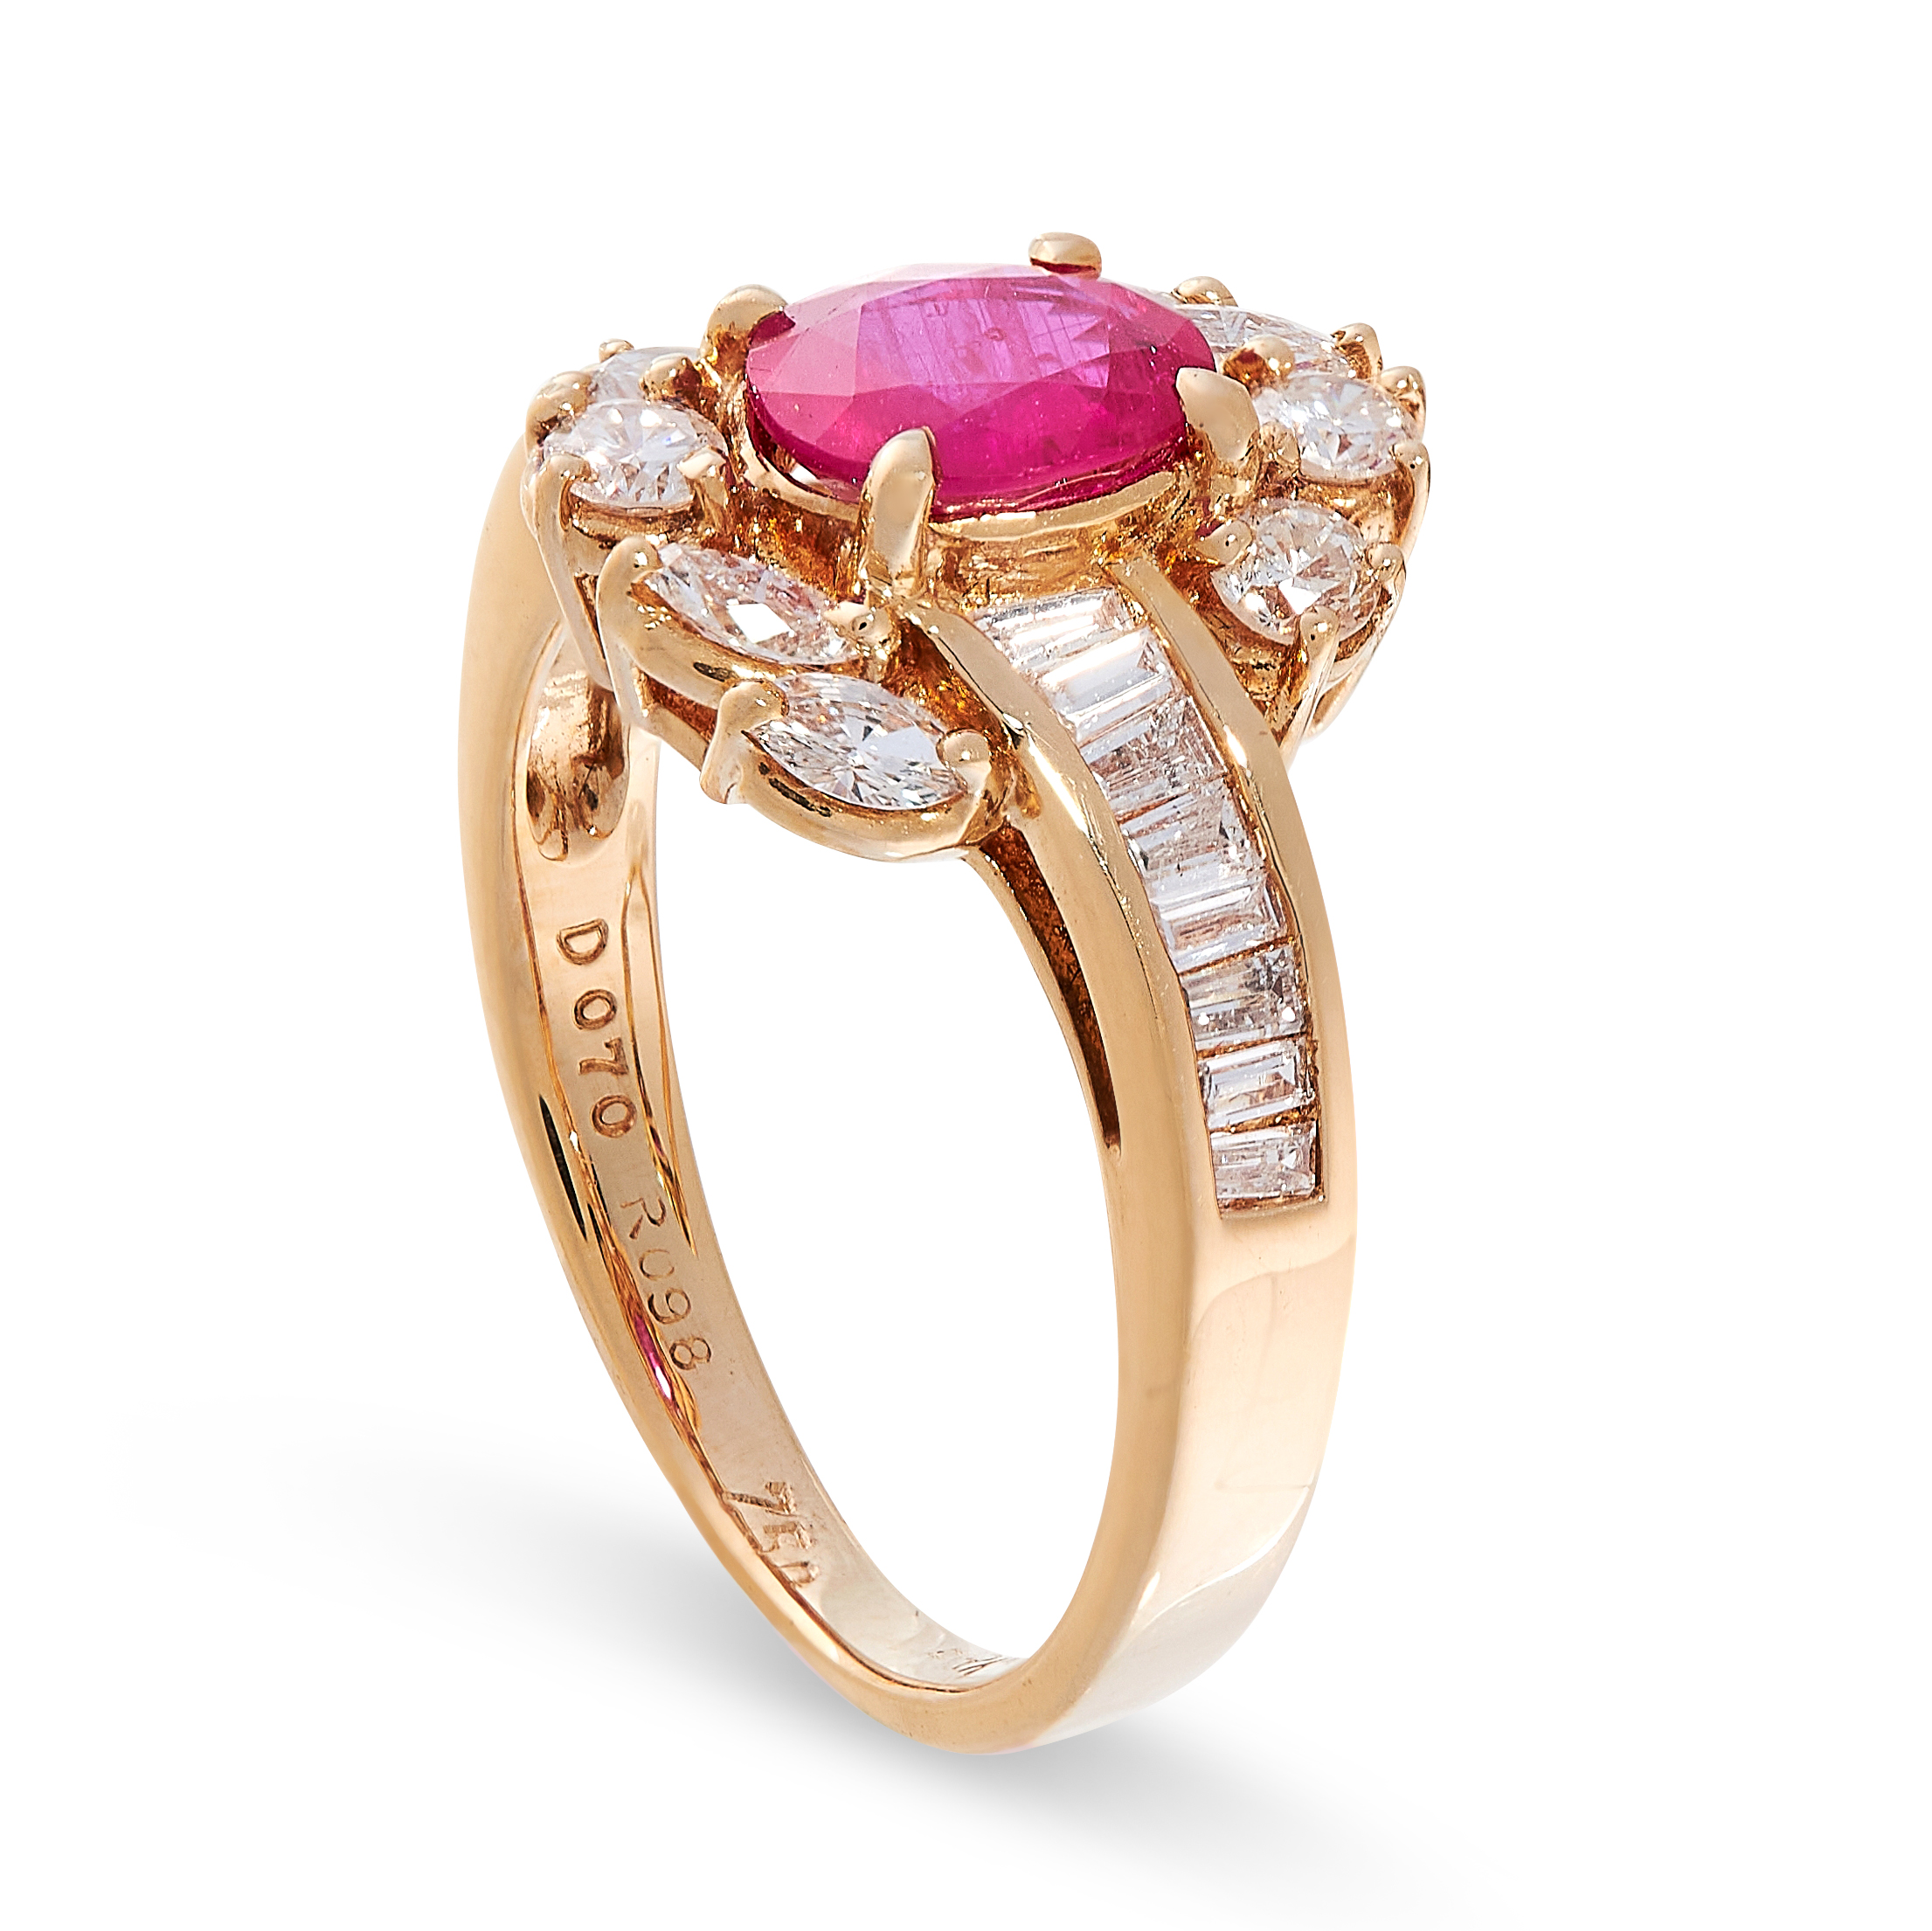 A RUBY AND DIAMOND RING in 18ct yellow gold, set with an oval ruby of 0.98 carats, within a border - Image 2 of 2